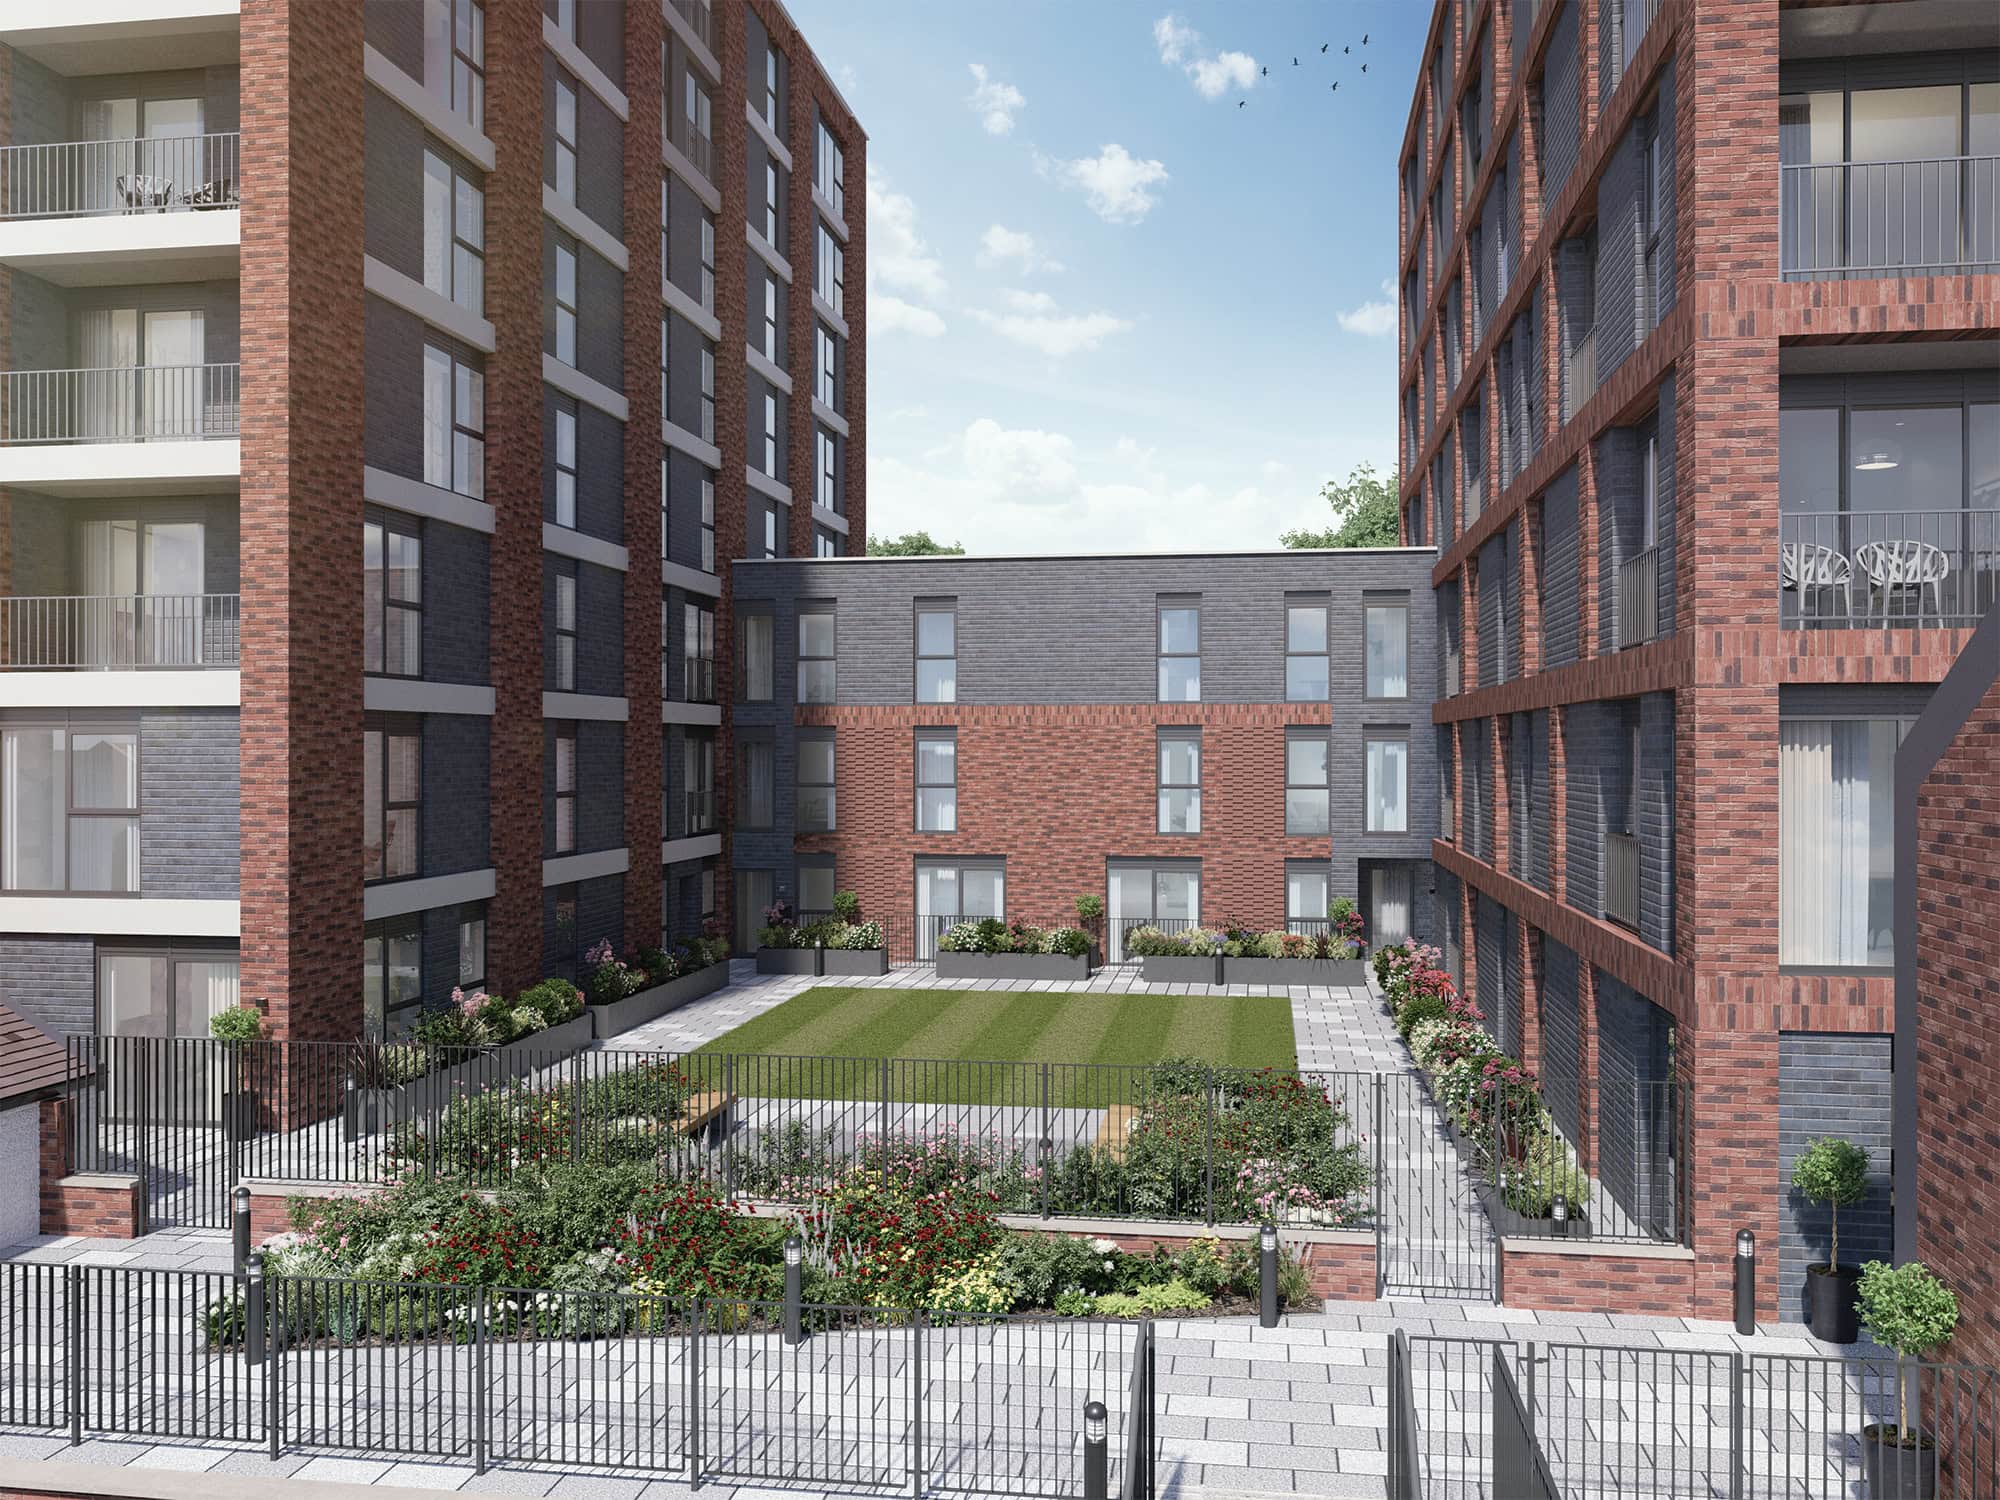 Image of The Old Brewery development from Abri Homes - available to purchase through Shared Ownership on Share to Buy!